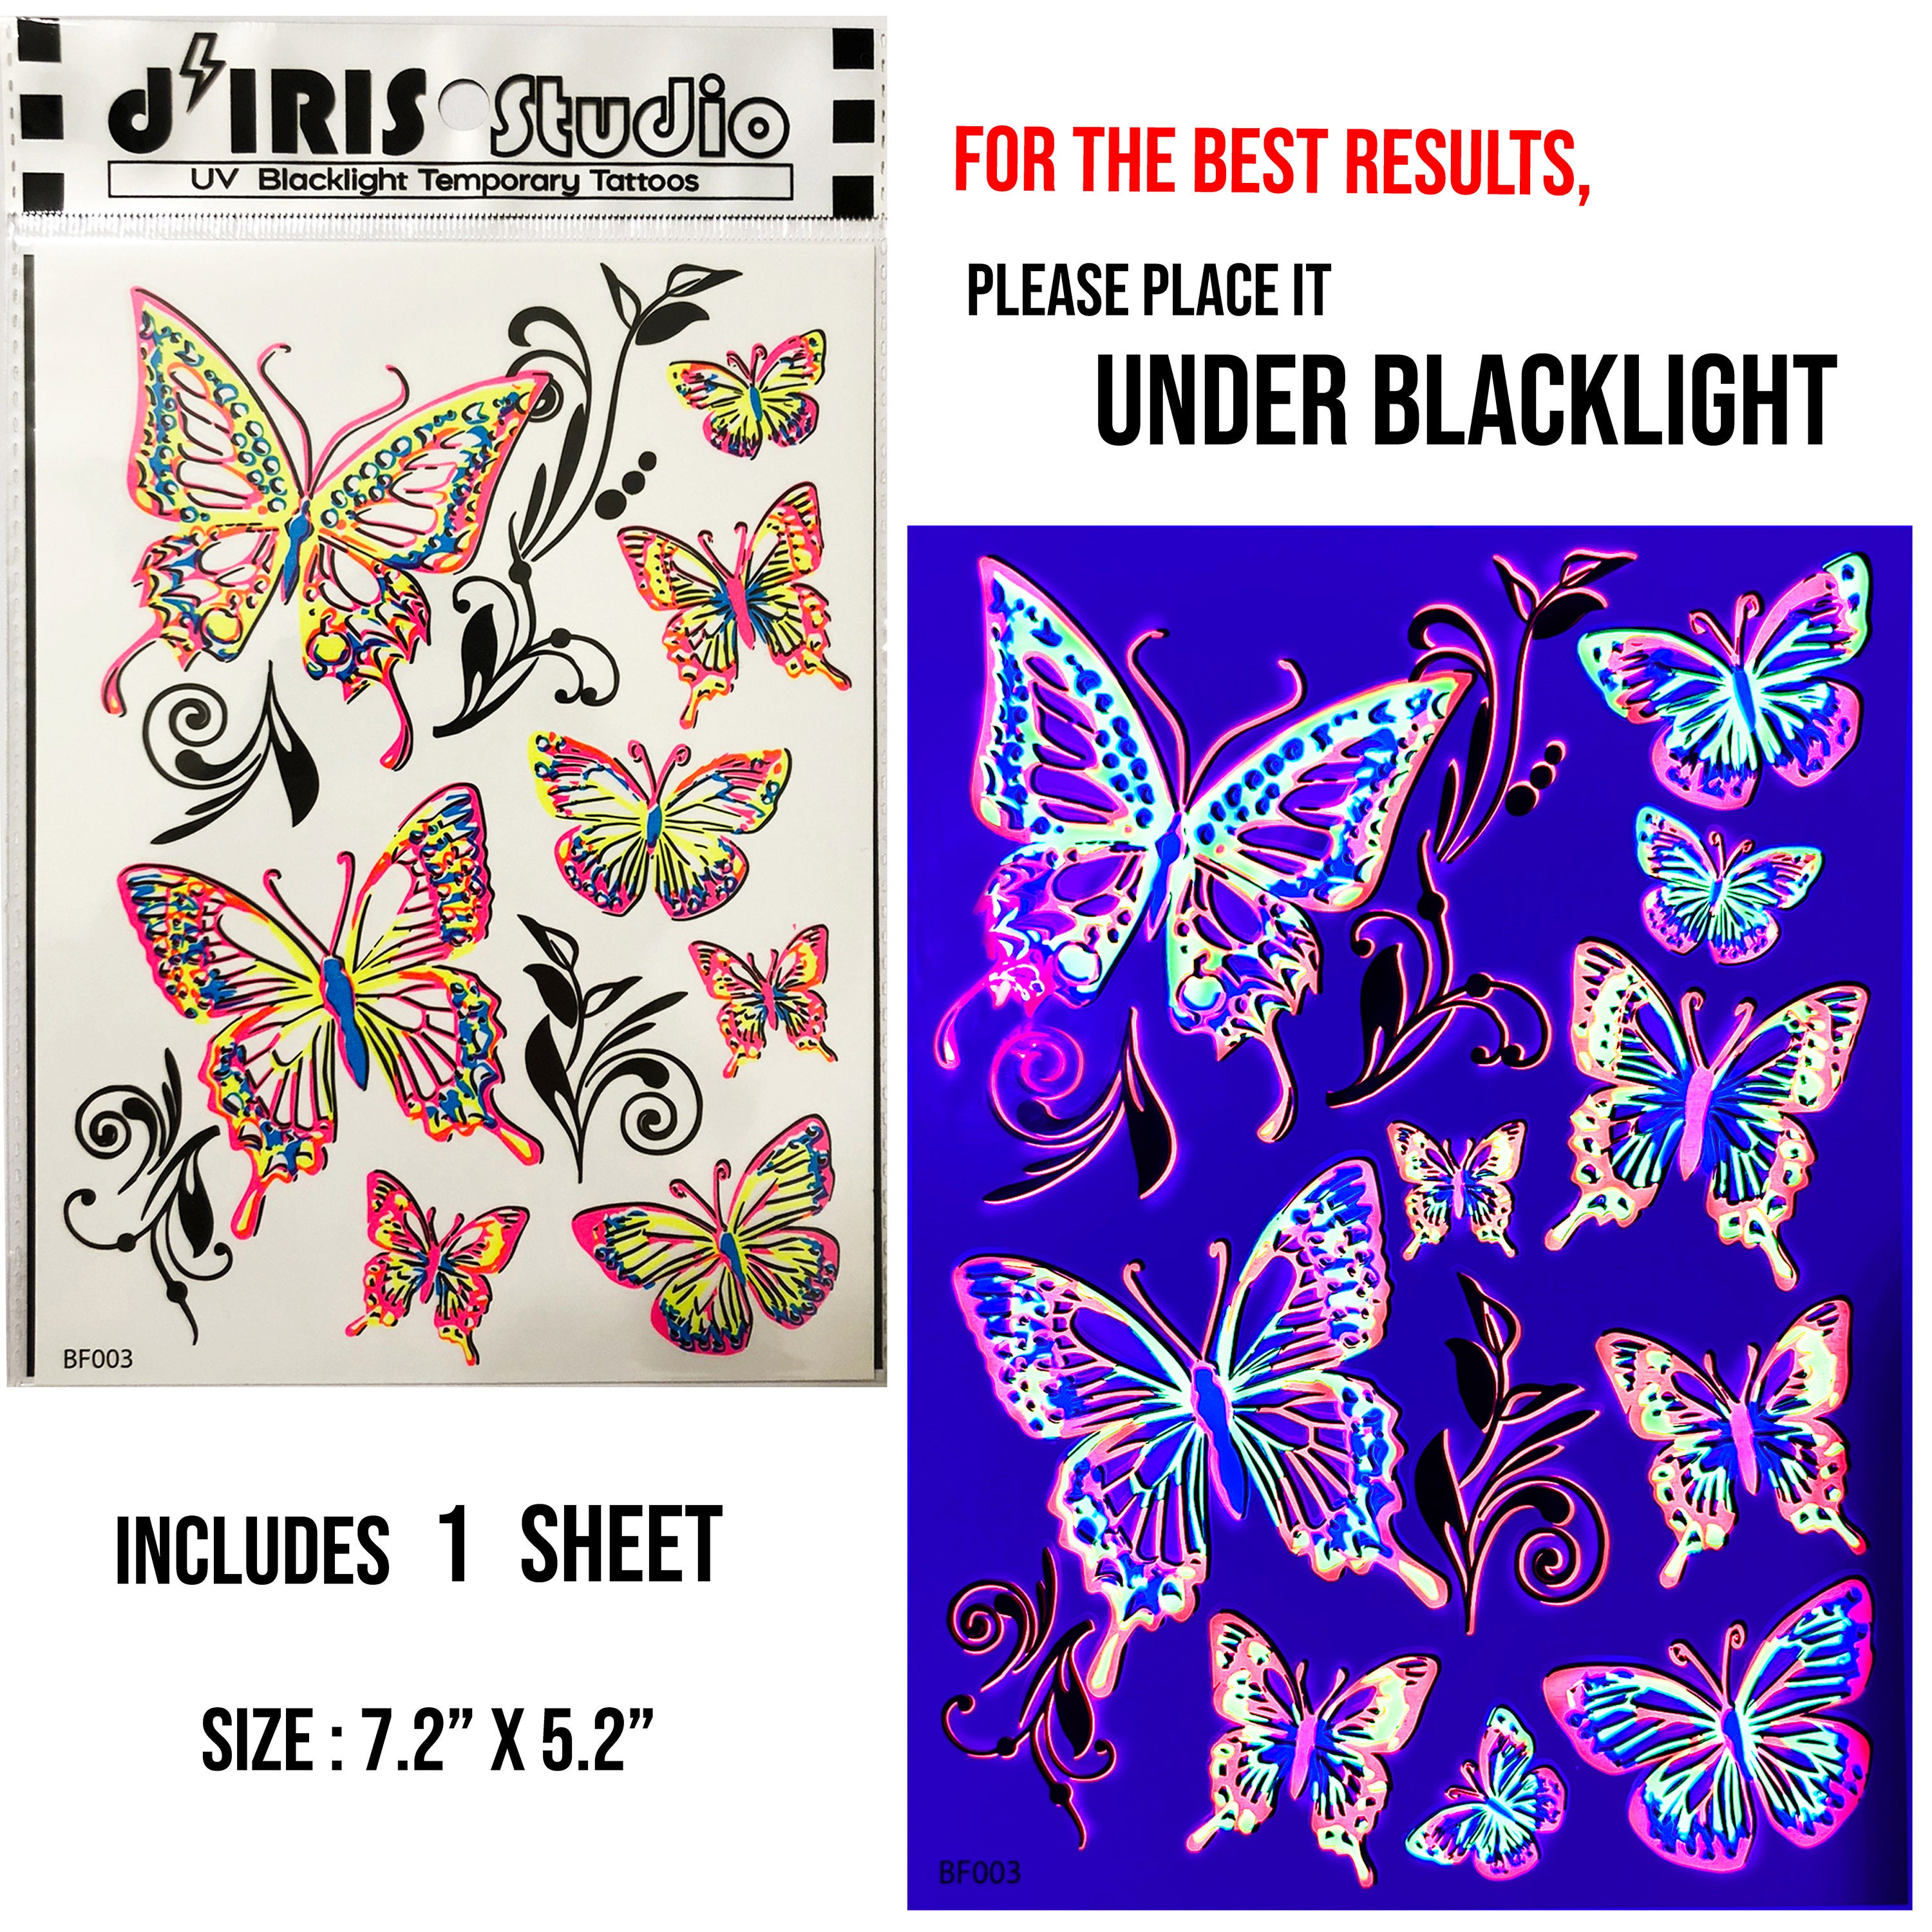 UV Glow in the Dark Party Tattoos Unicorn Temporary Blacklight Rave  Accessories Semipermantent Cover up Sleeve Festival Henna Flower Tattoo 